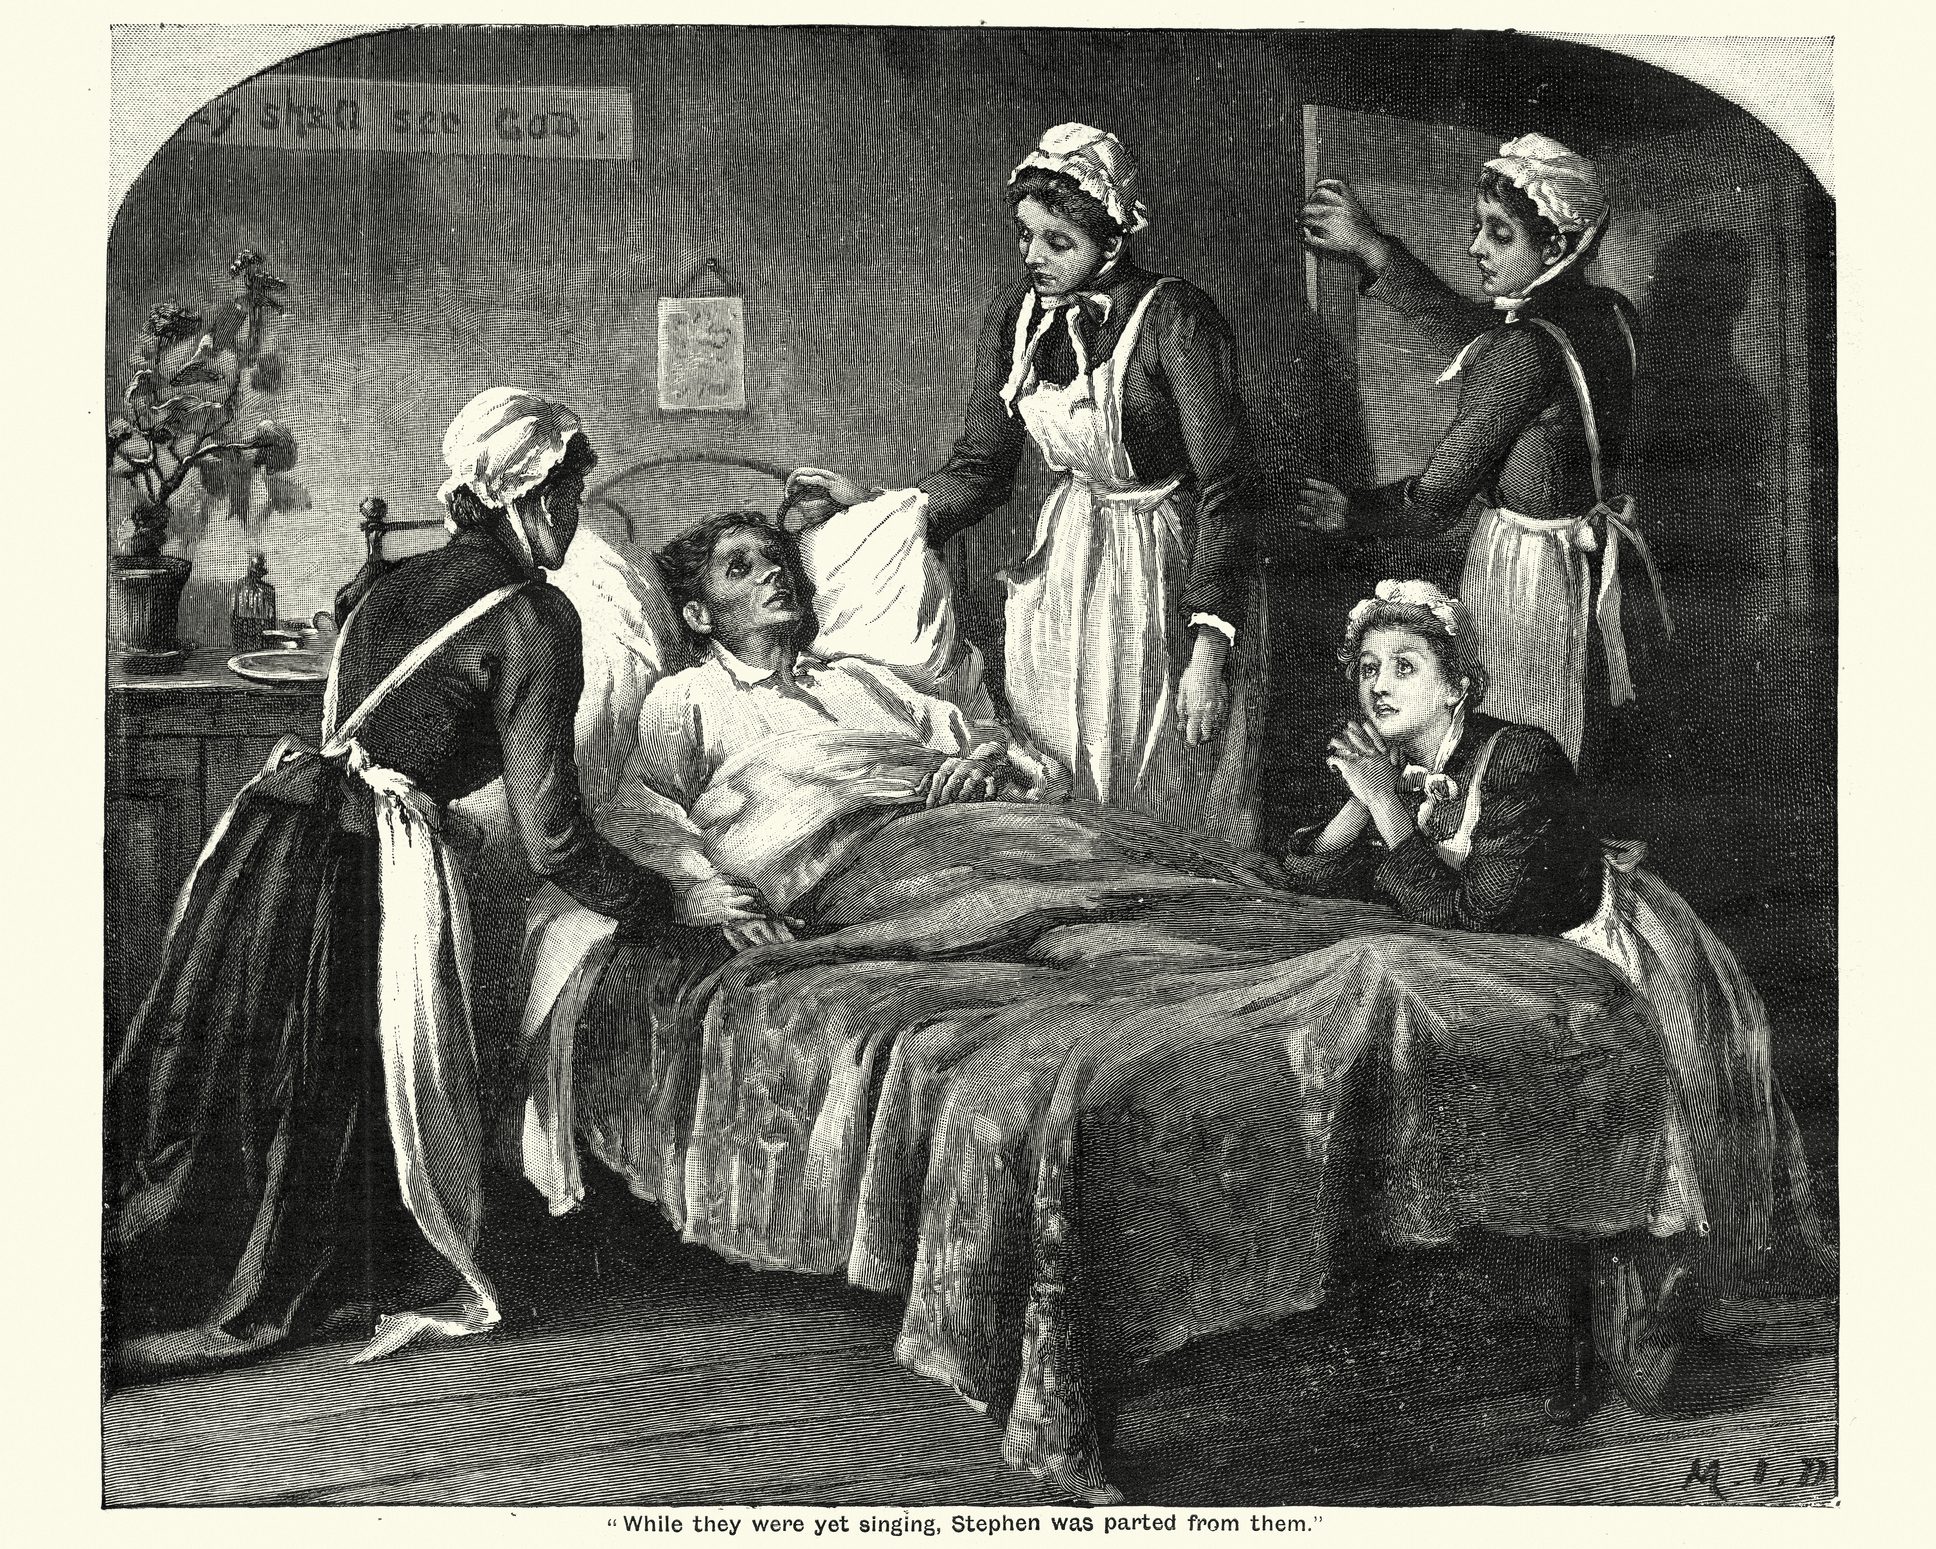 Victorian nurses caring for a dying man